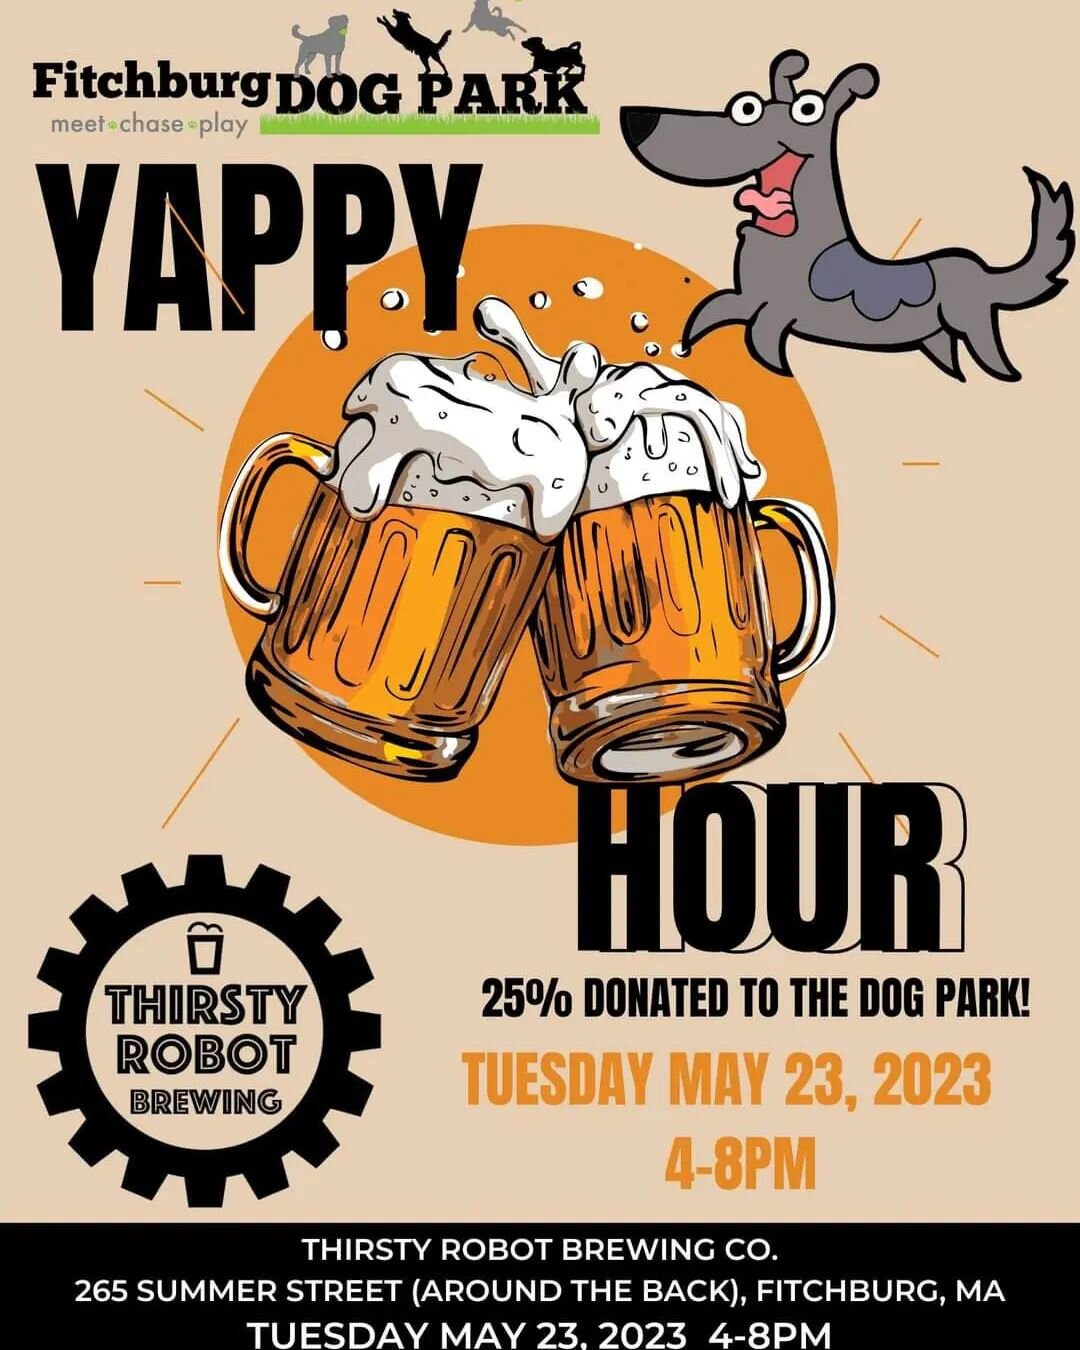 Thirsty Robot Brewing Company will be donating 25% of food sales from 4:00pm to 8pm on Tuesday May 23, 2023 to the Fitchburg Dog Park.

Our dog park friends will be there with some raffle baskets to win!

Dogs allowed on the patio OUTSIDE!

TRBC sell